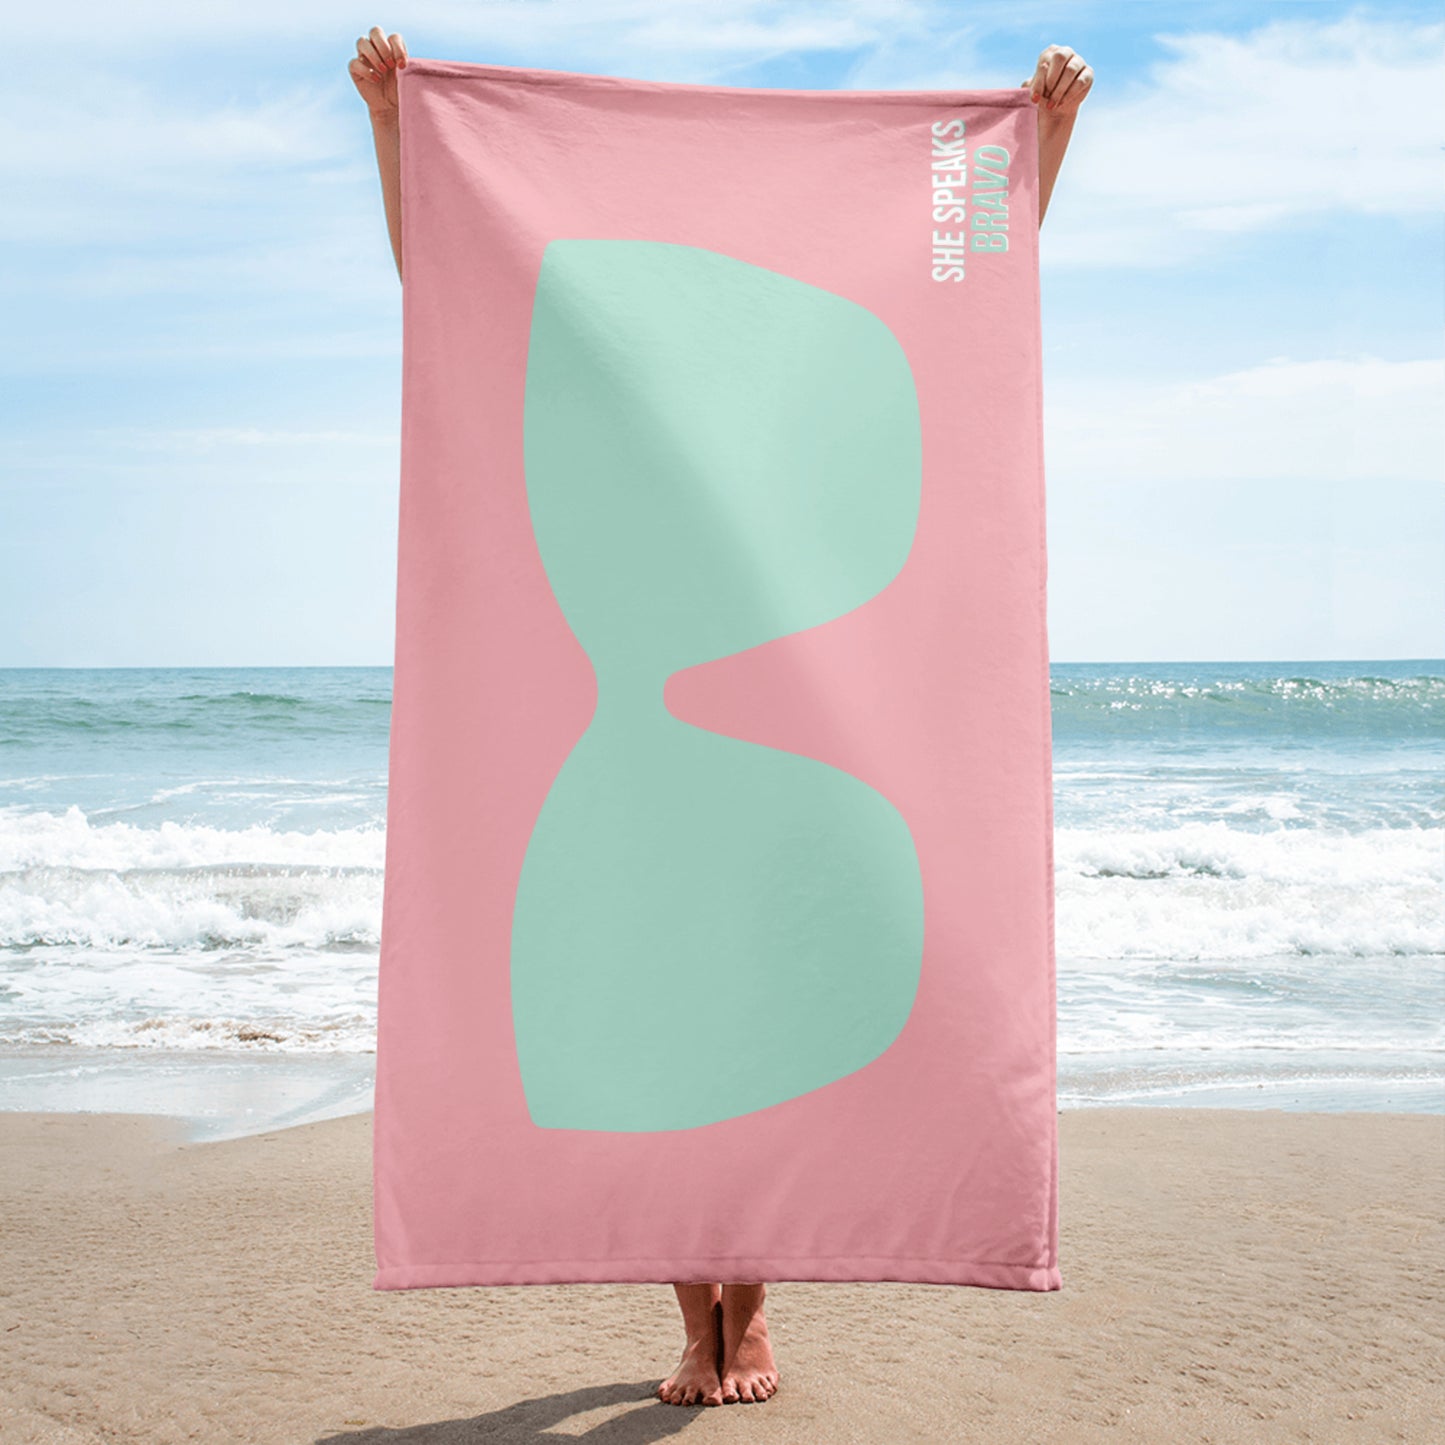 It's Giving Shades Beach Towel - Pink/Blue